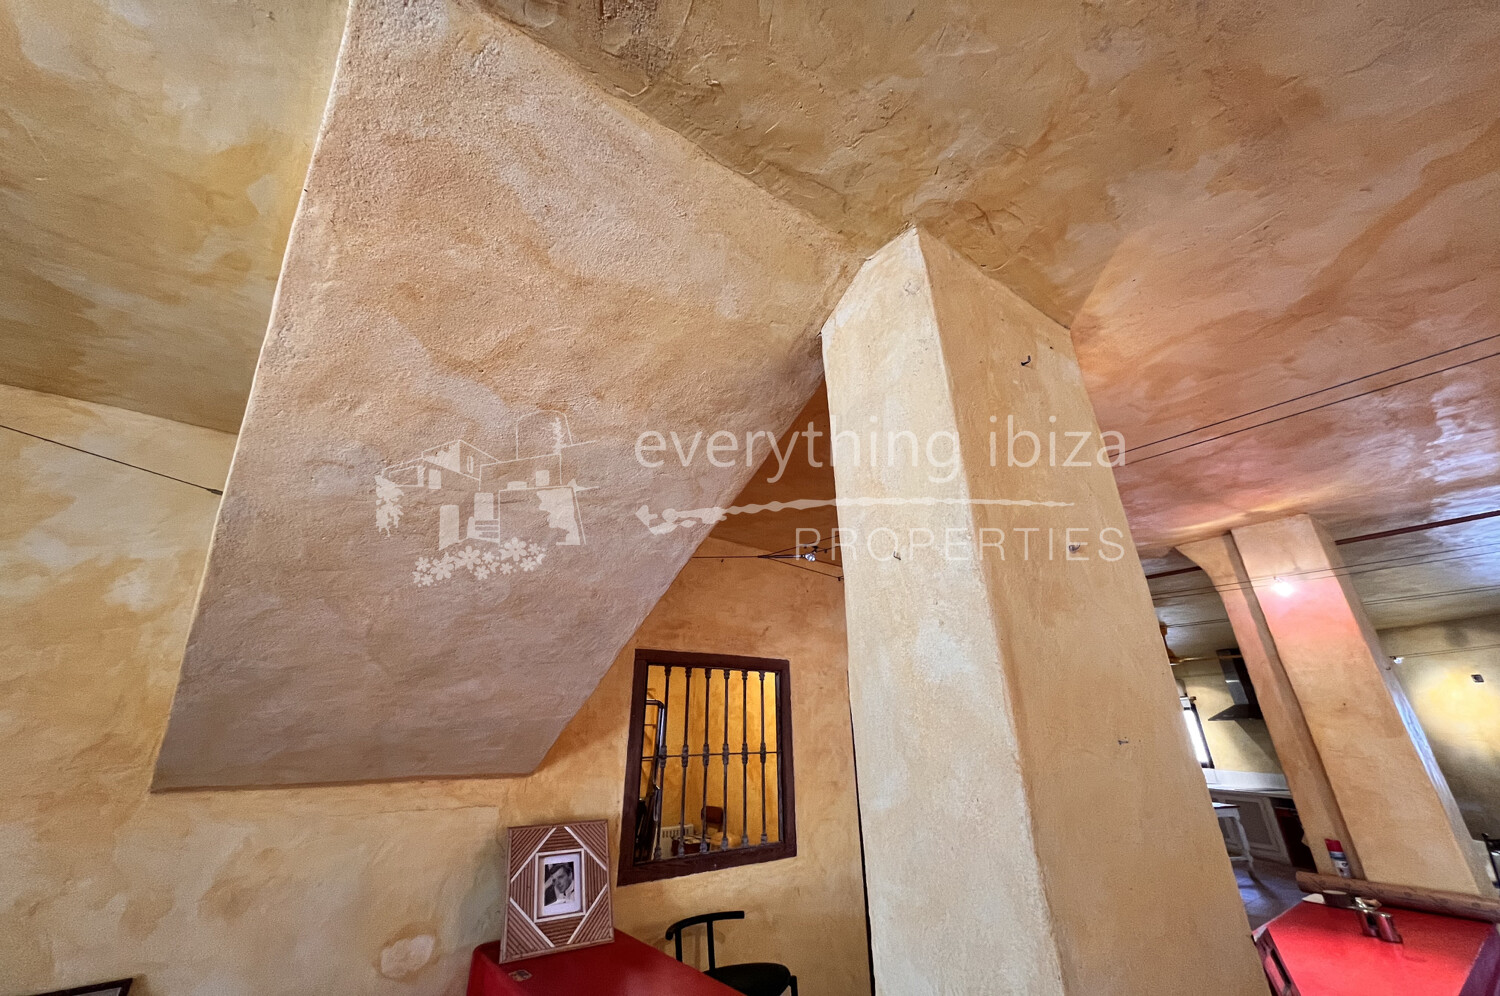 https://www.everythingibiza.com/properties/versatile-commer…of-san-jose-1640/,ref. 15, for sale in Ibiza by everything ibiza Properties